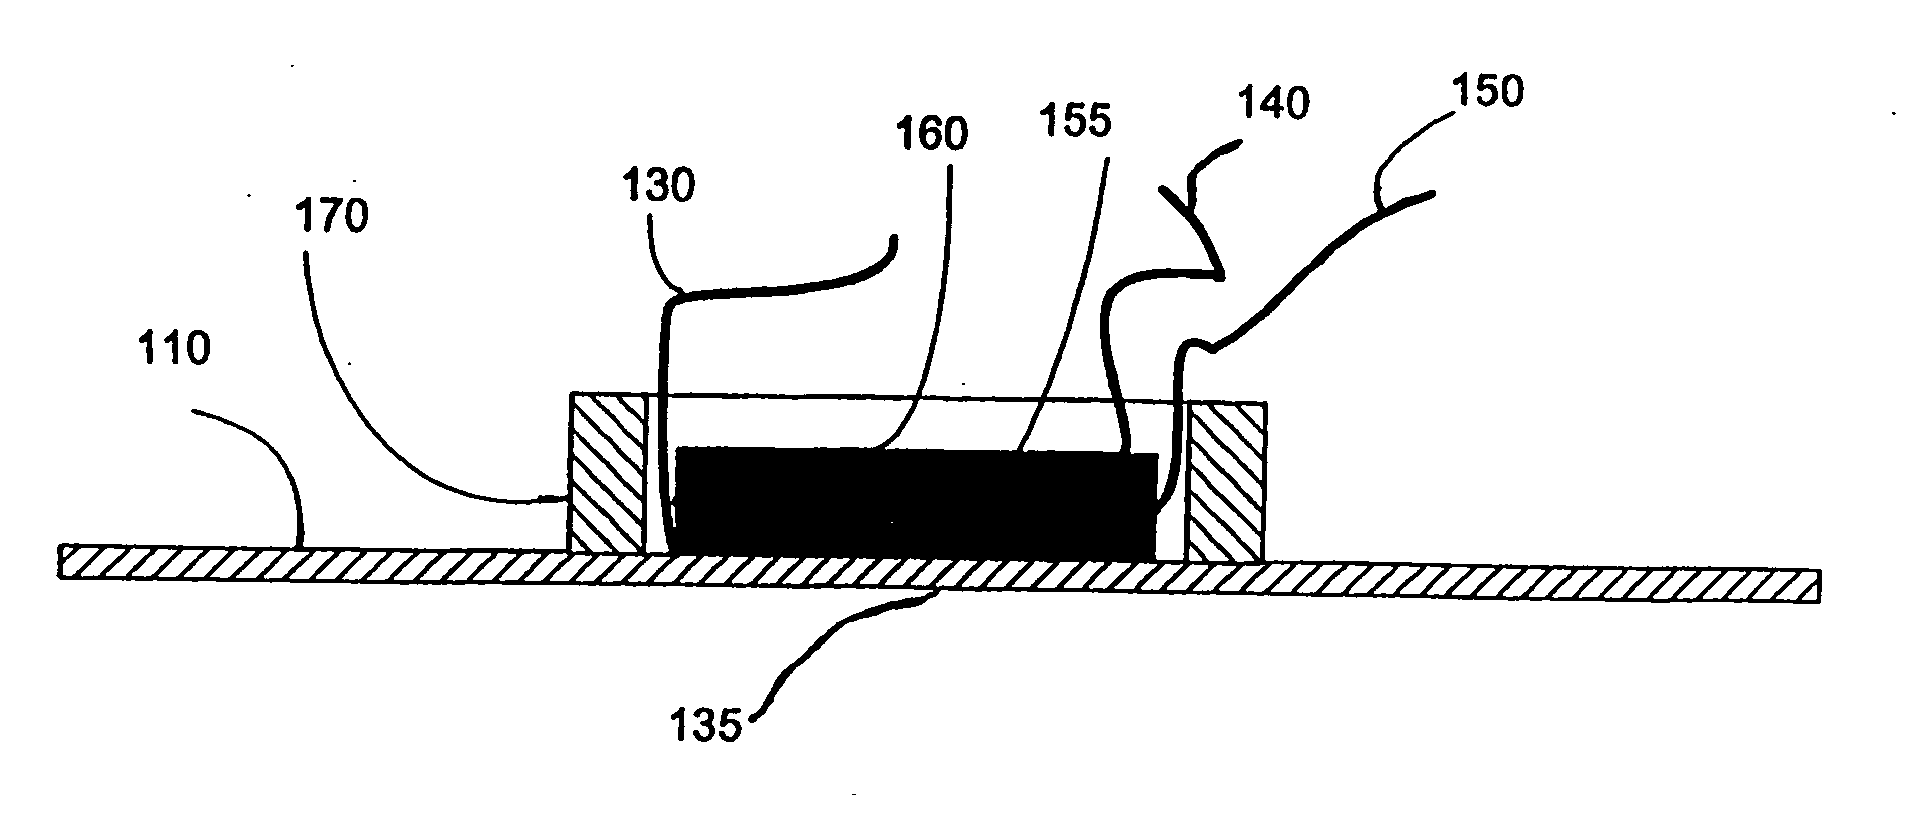 Implantable medical device with integrated acoustic